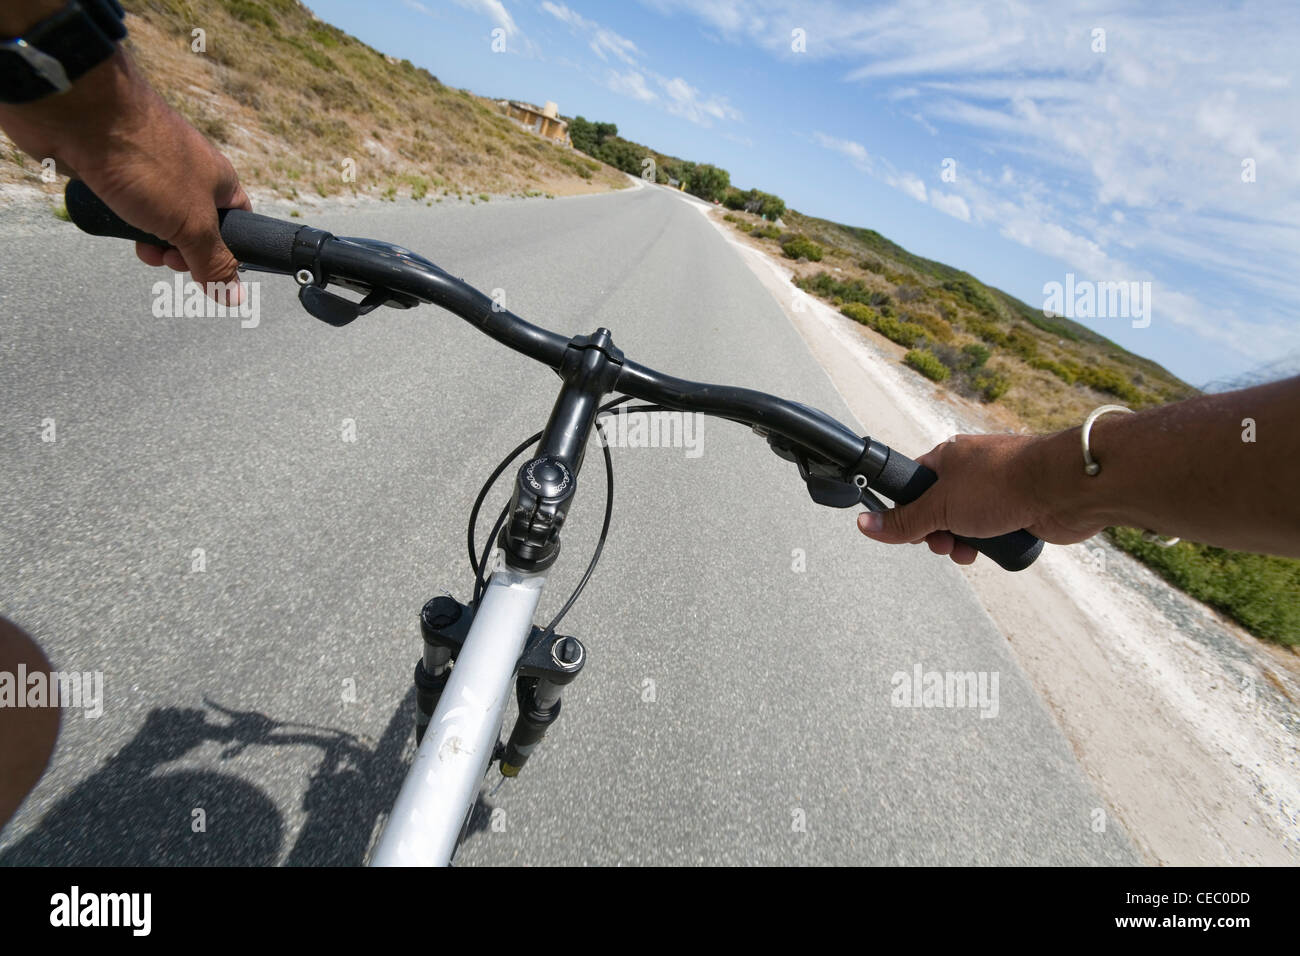 Mountain bike rider's view on country road. Rottnest Island, Australie occidentale, Australie Banque D'Images